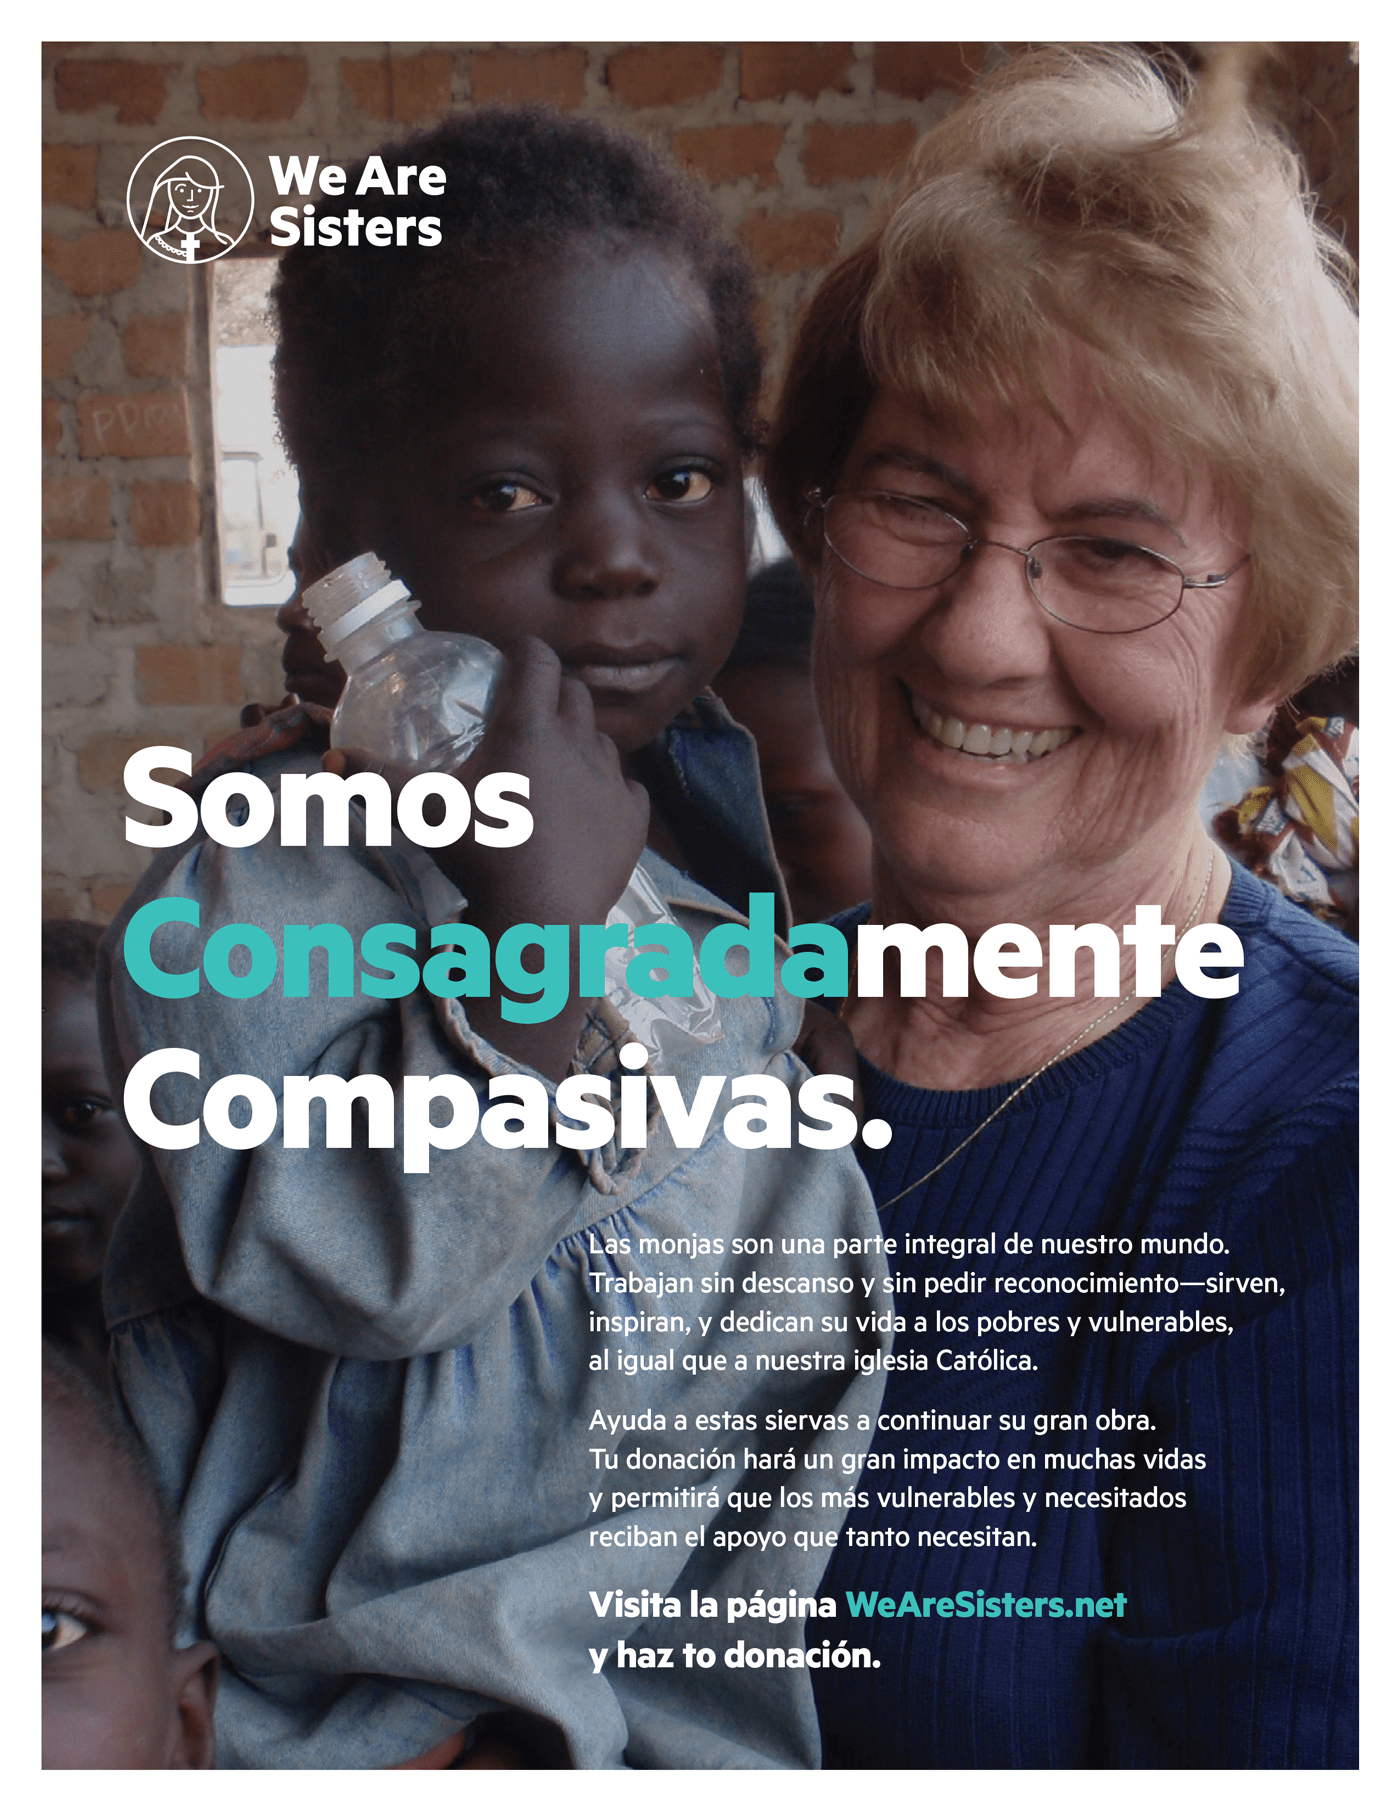 We Are Sisters Campaign